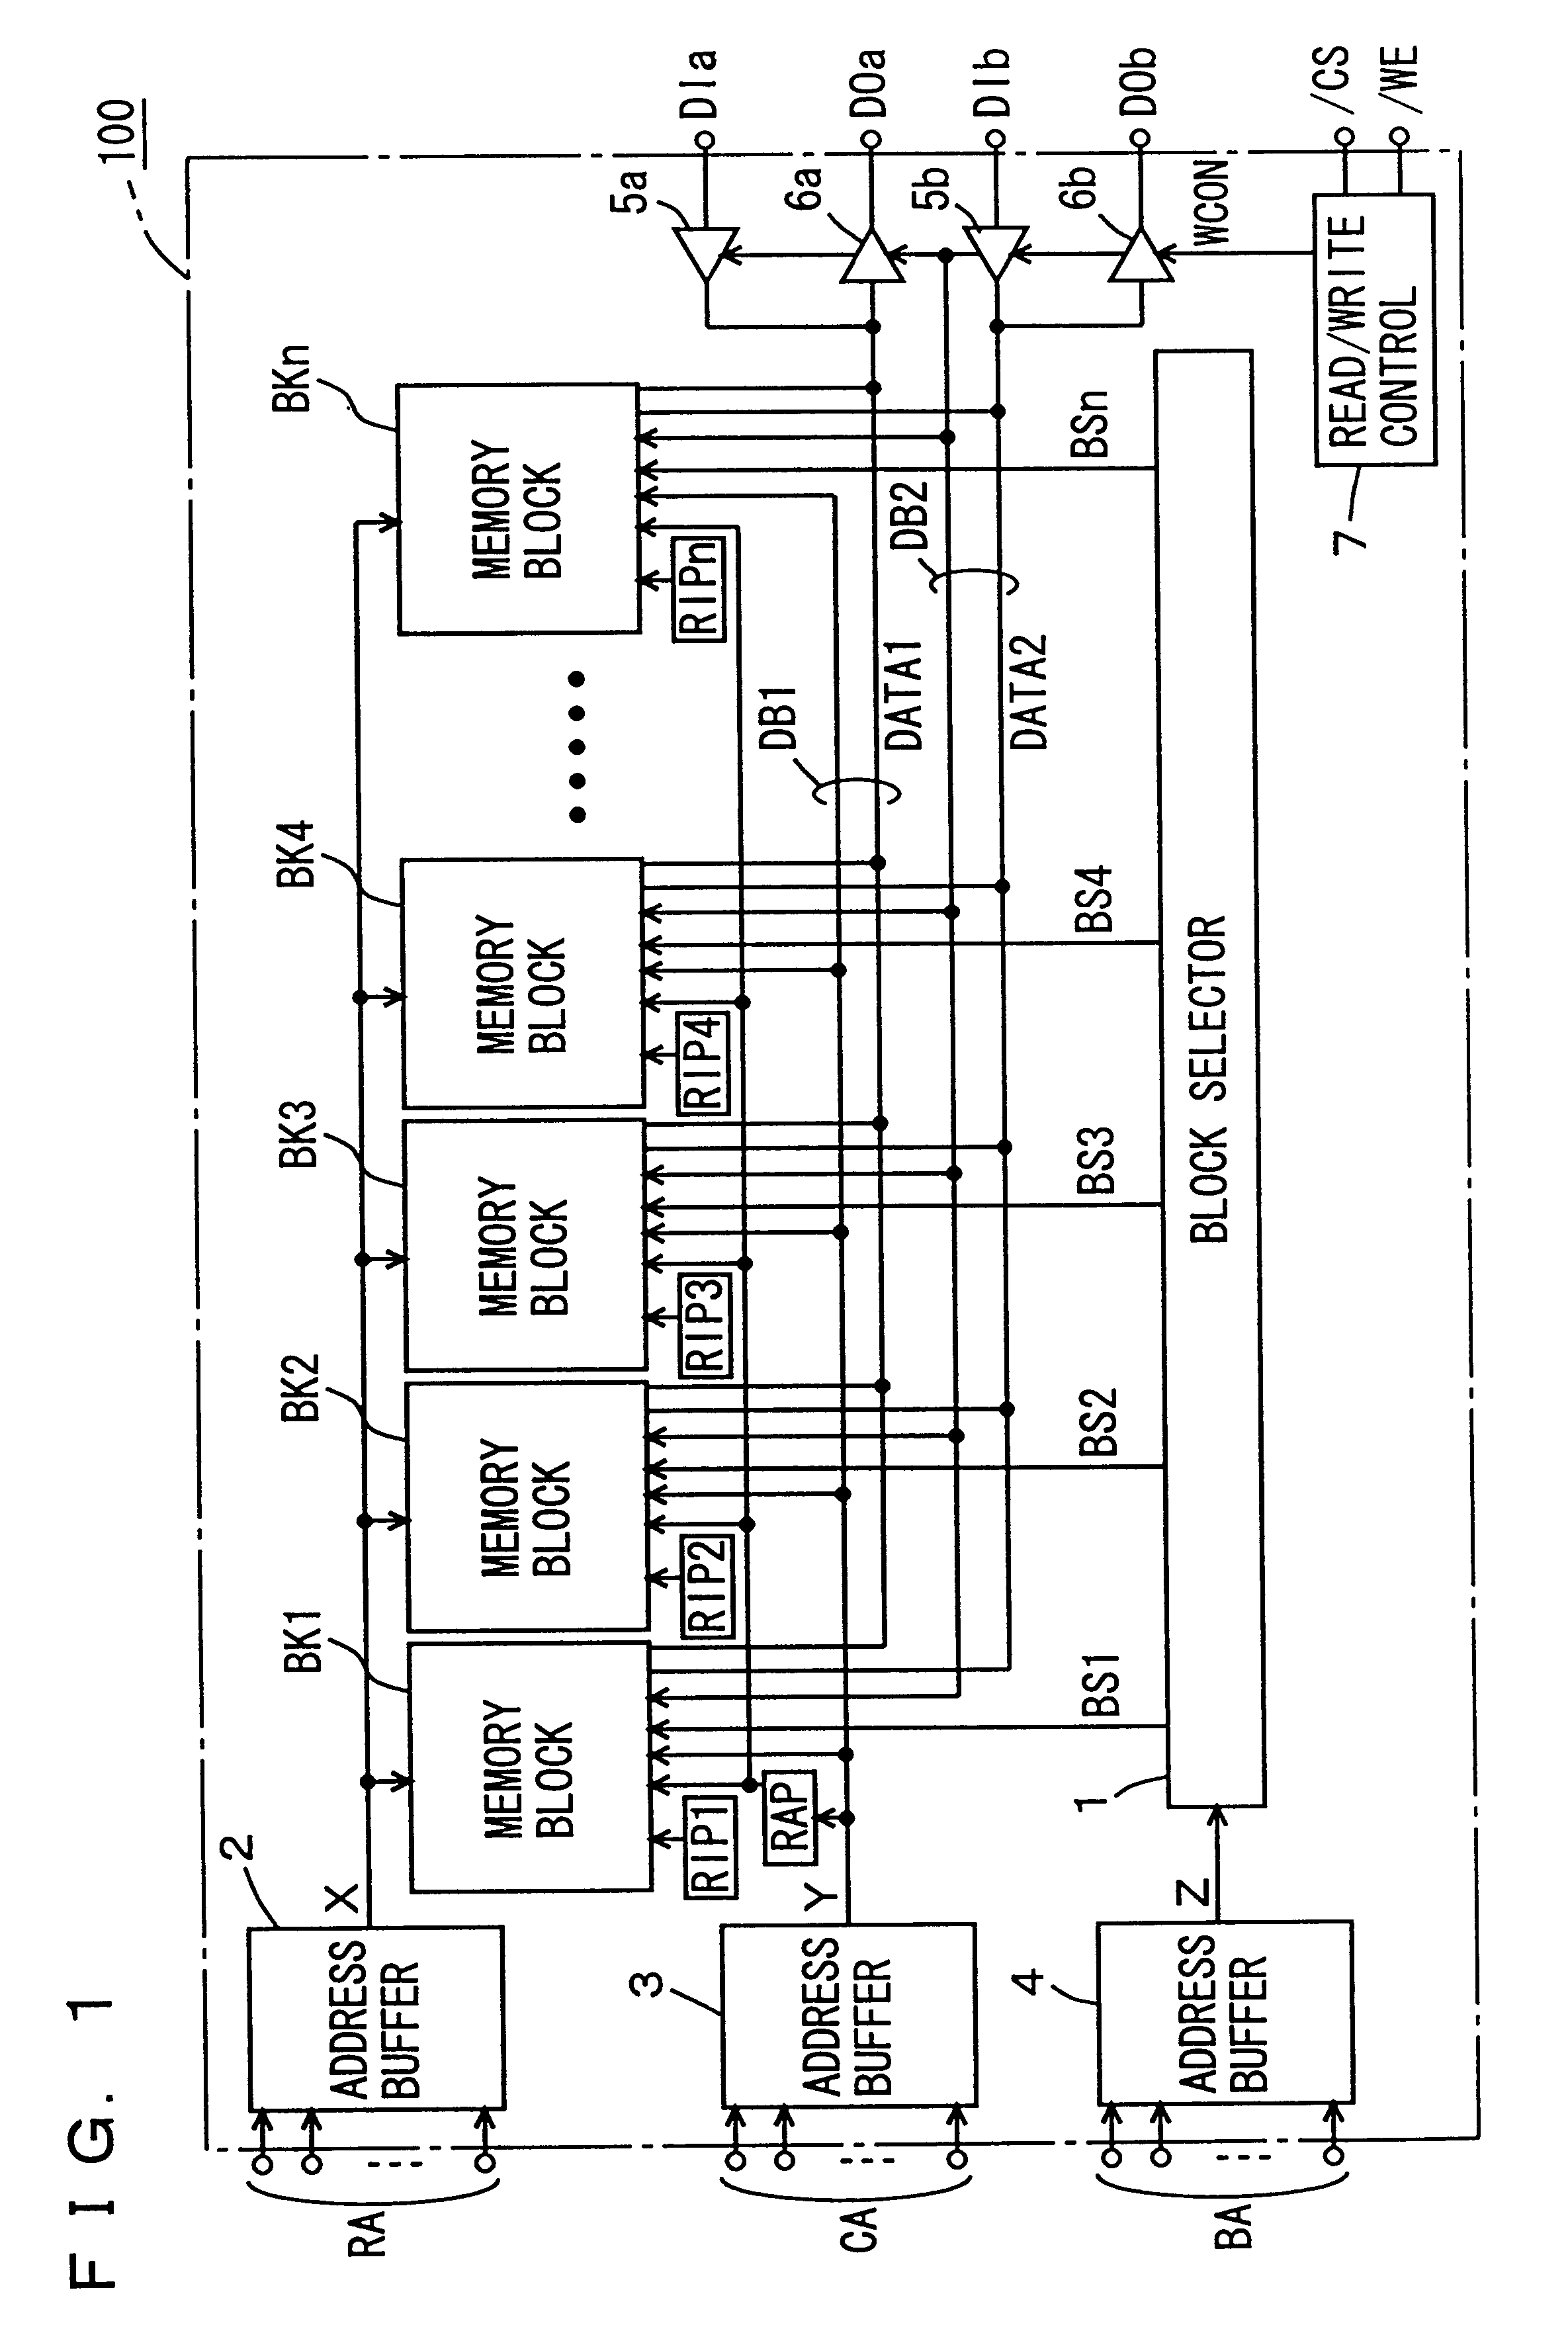 Semiconductor memory device allowing reliable repairing of a defective column